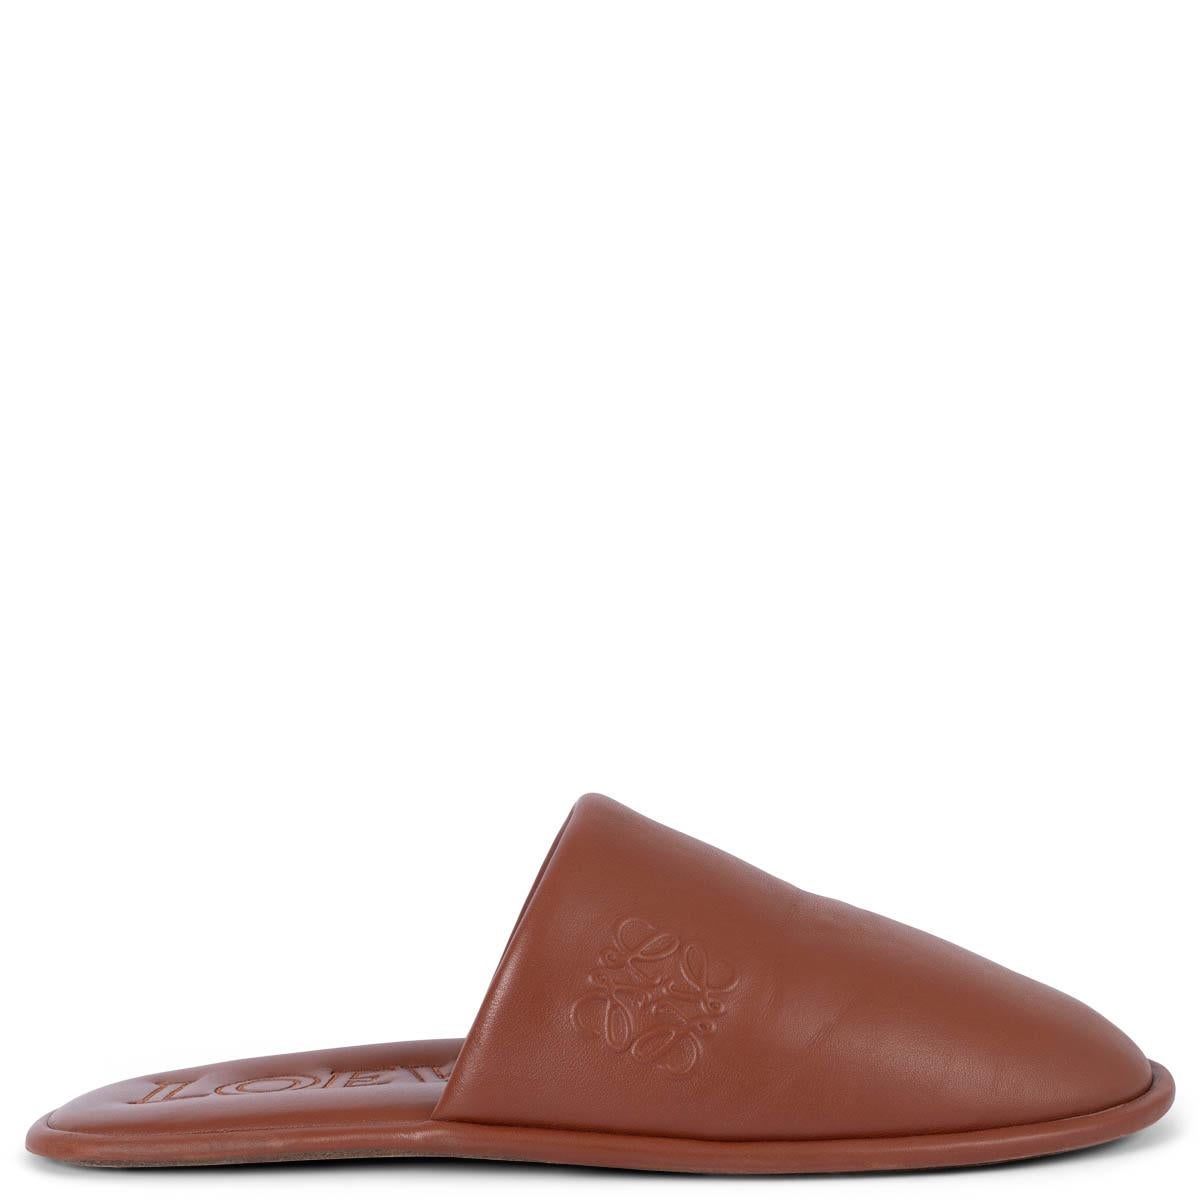 LOEWE cognac leather LOGO EMBOSSED SLIPPERS Flats Shoes 39 fit 38.5 For Sale